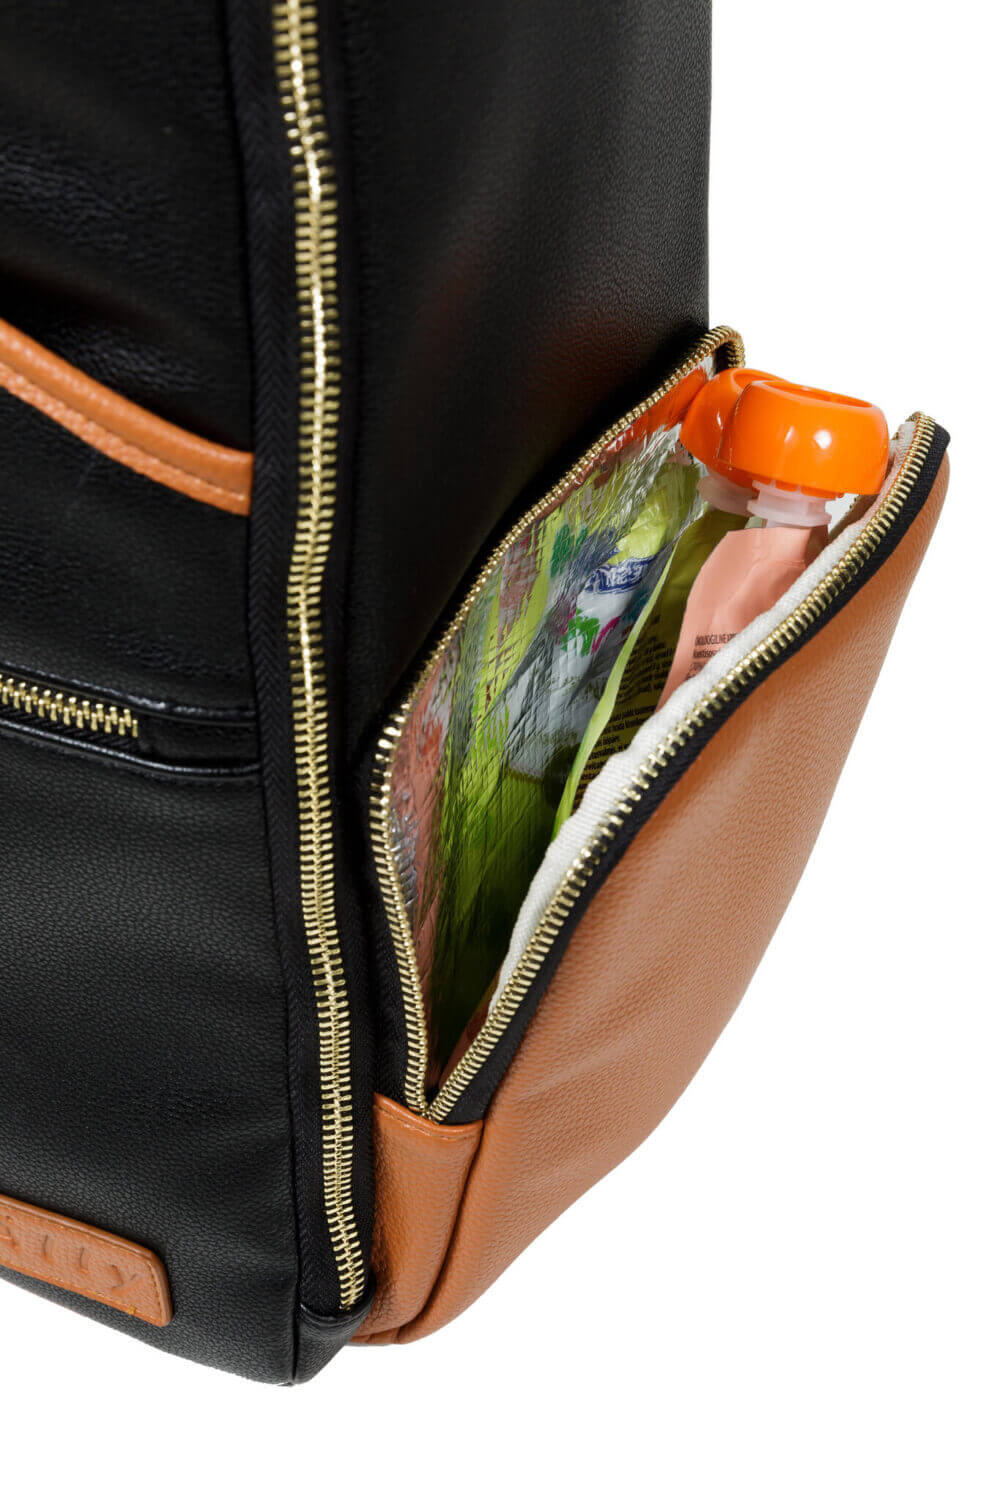 a close up of a backpack with a magazine in it.